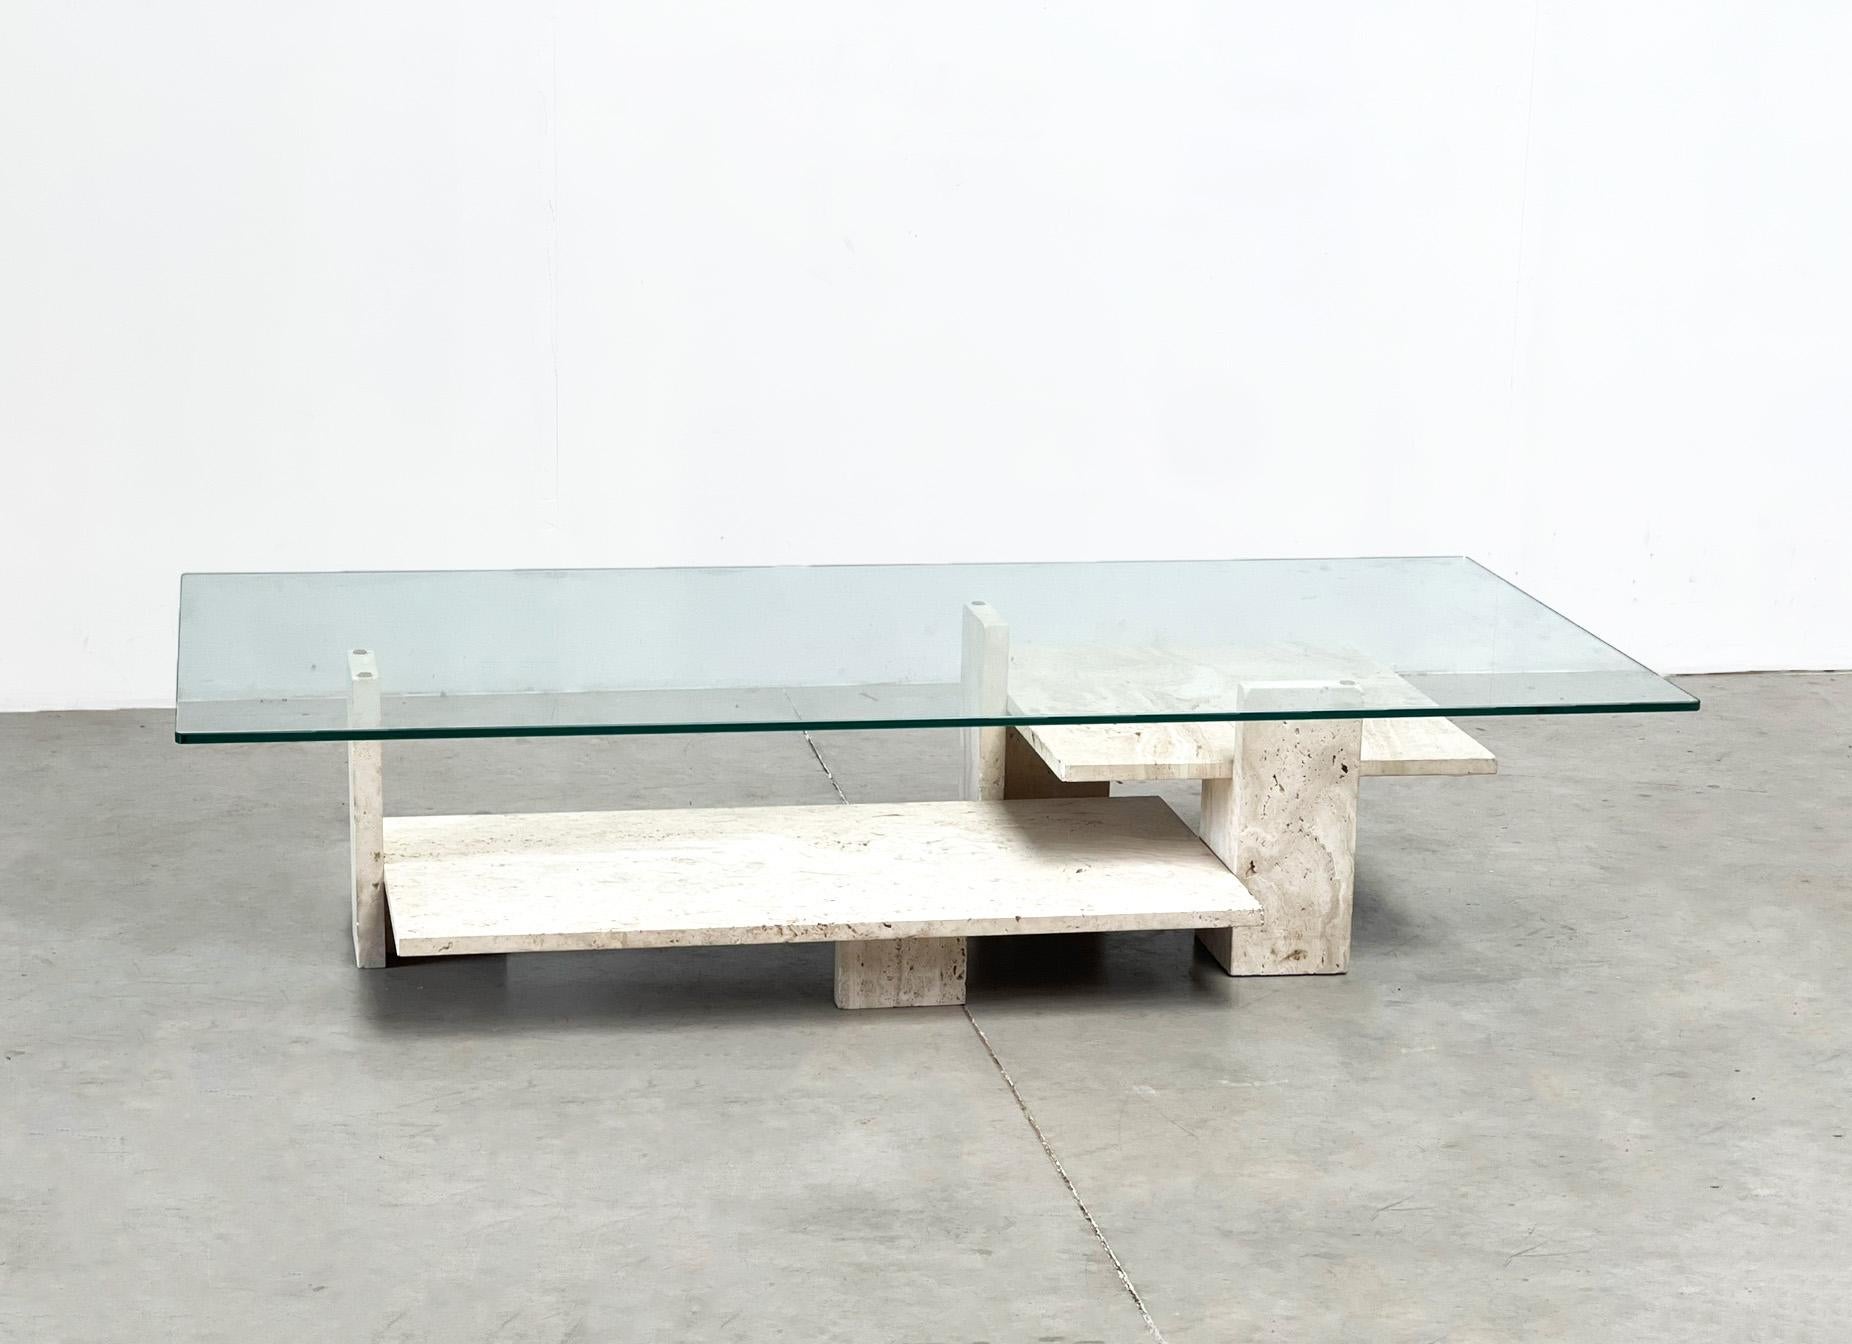 Xl Willy Ballez coffee table
This sculptural coffee table was created by Belgian artist and architect Willy Ballez.

The table was made in the 80s in Belgium.

It features a glass top and a travertine base that consists of 2 parts. The large version